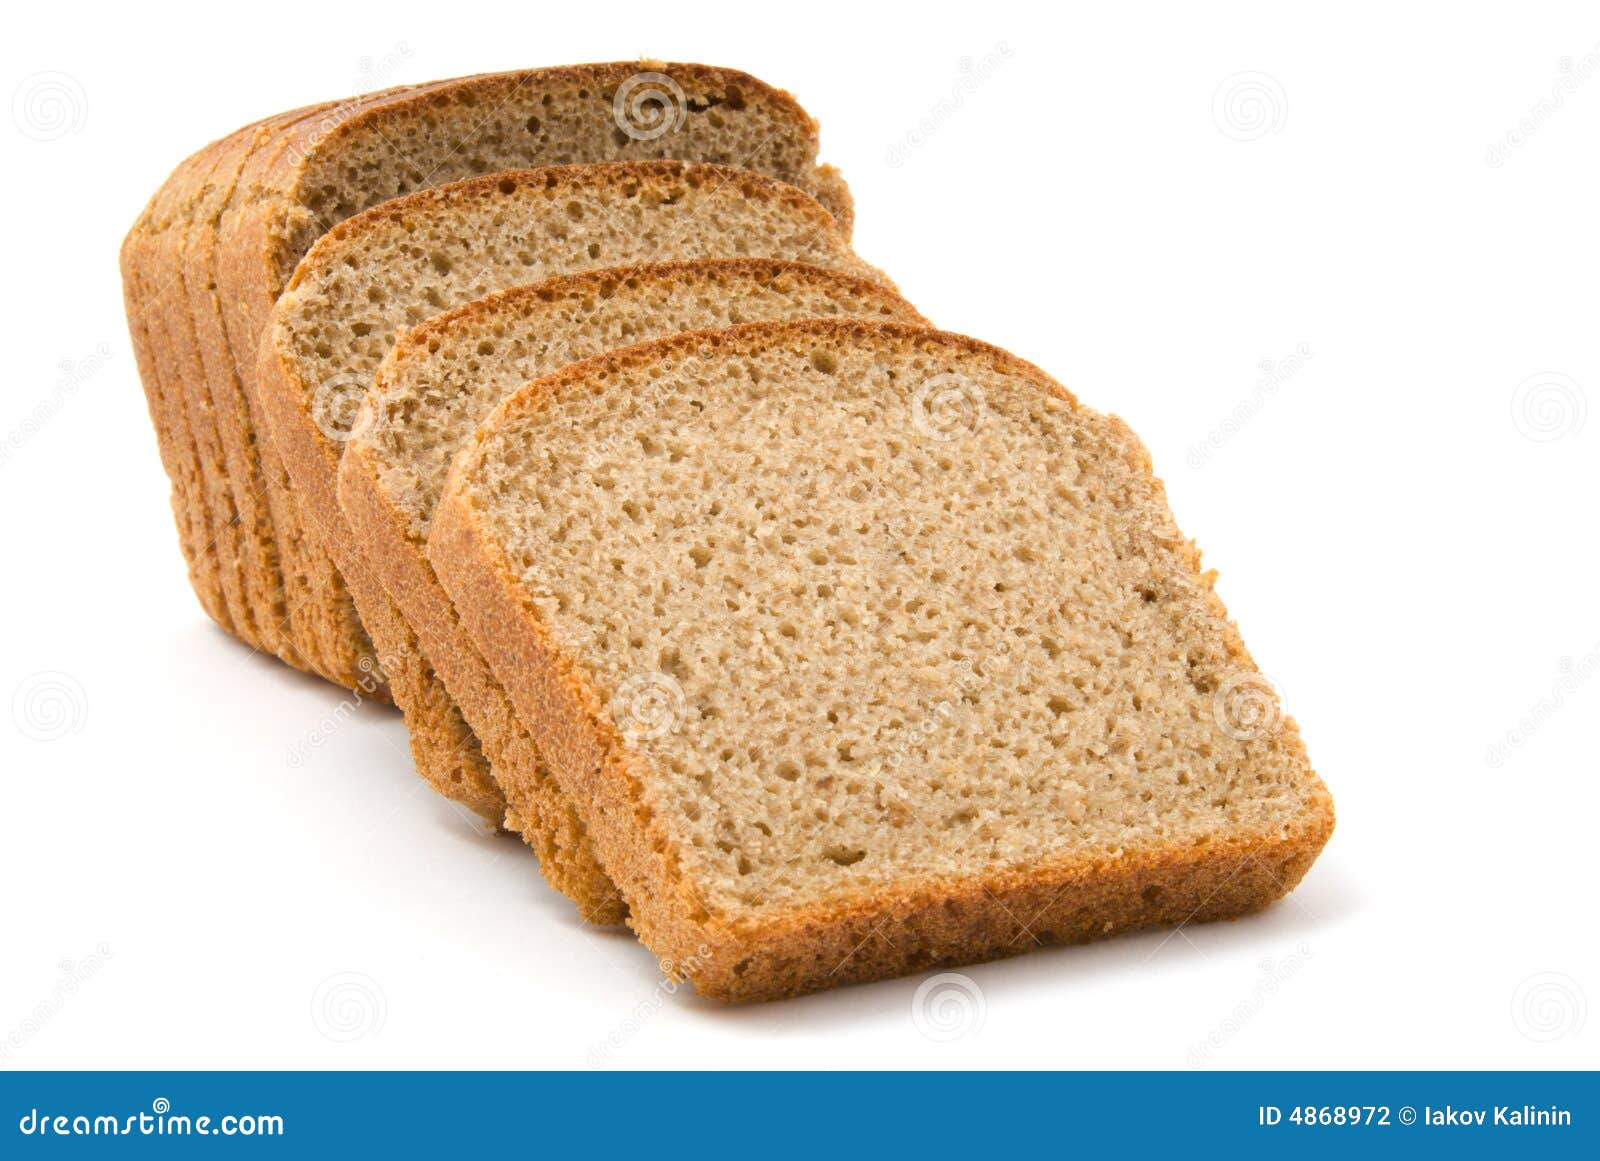 Slices of bread isolated on white background